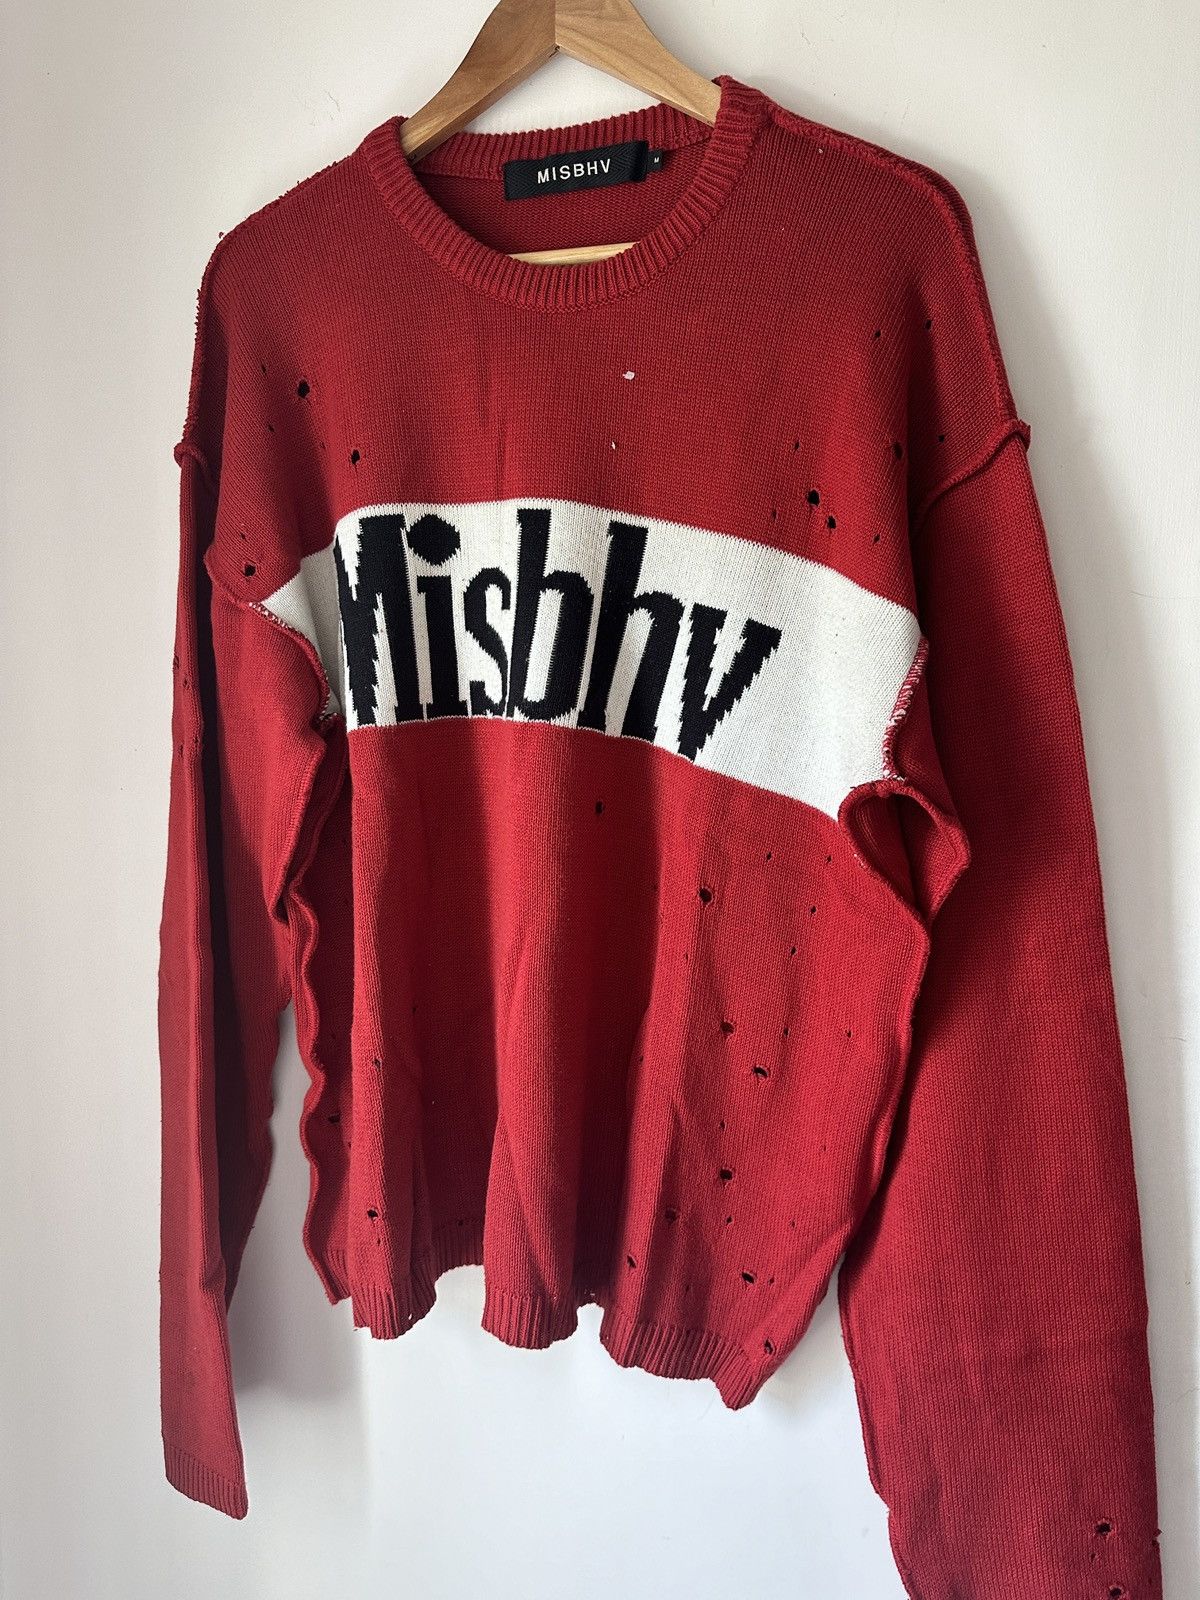 MISBHV Distressed Knitted Red Sweater - 1